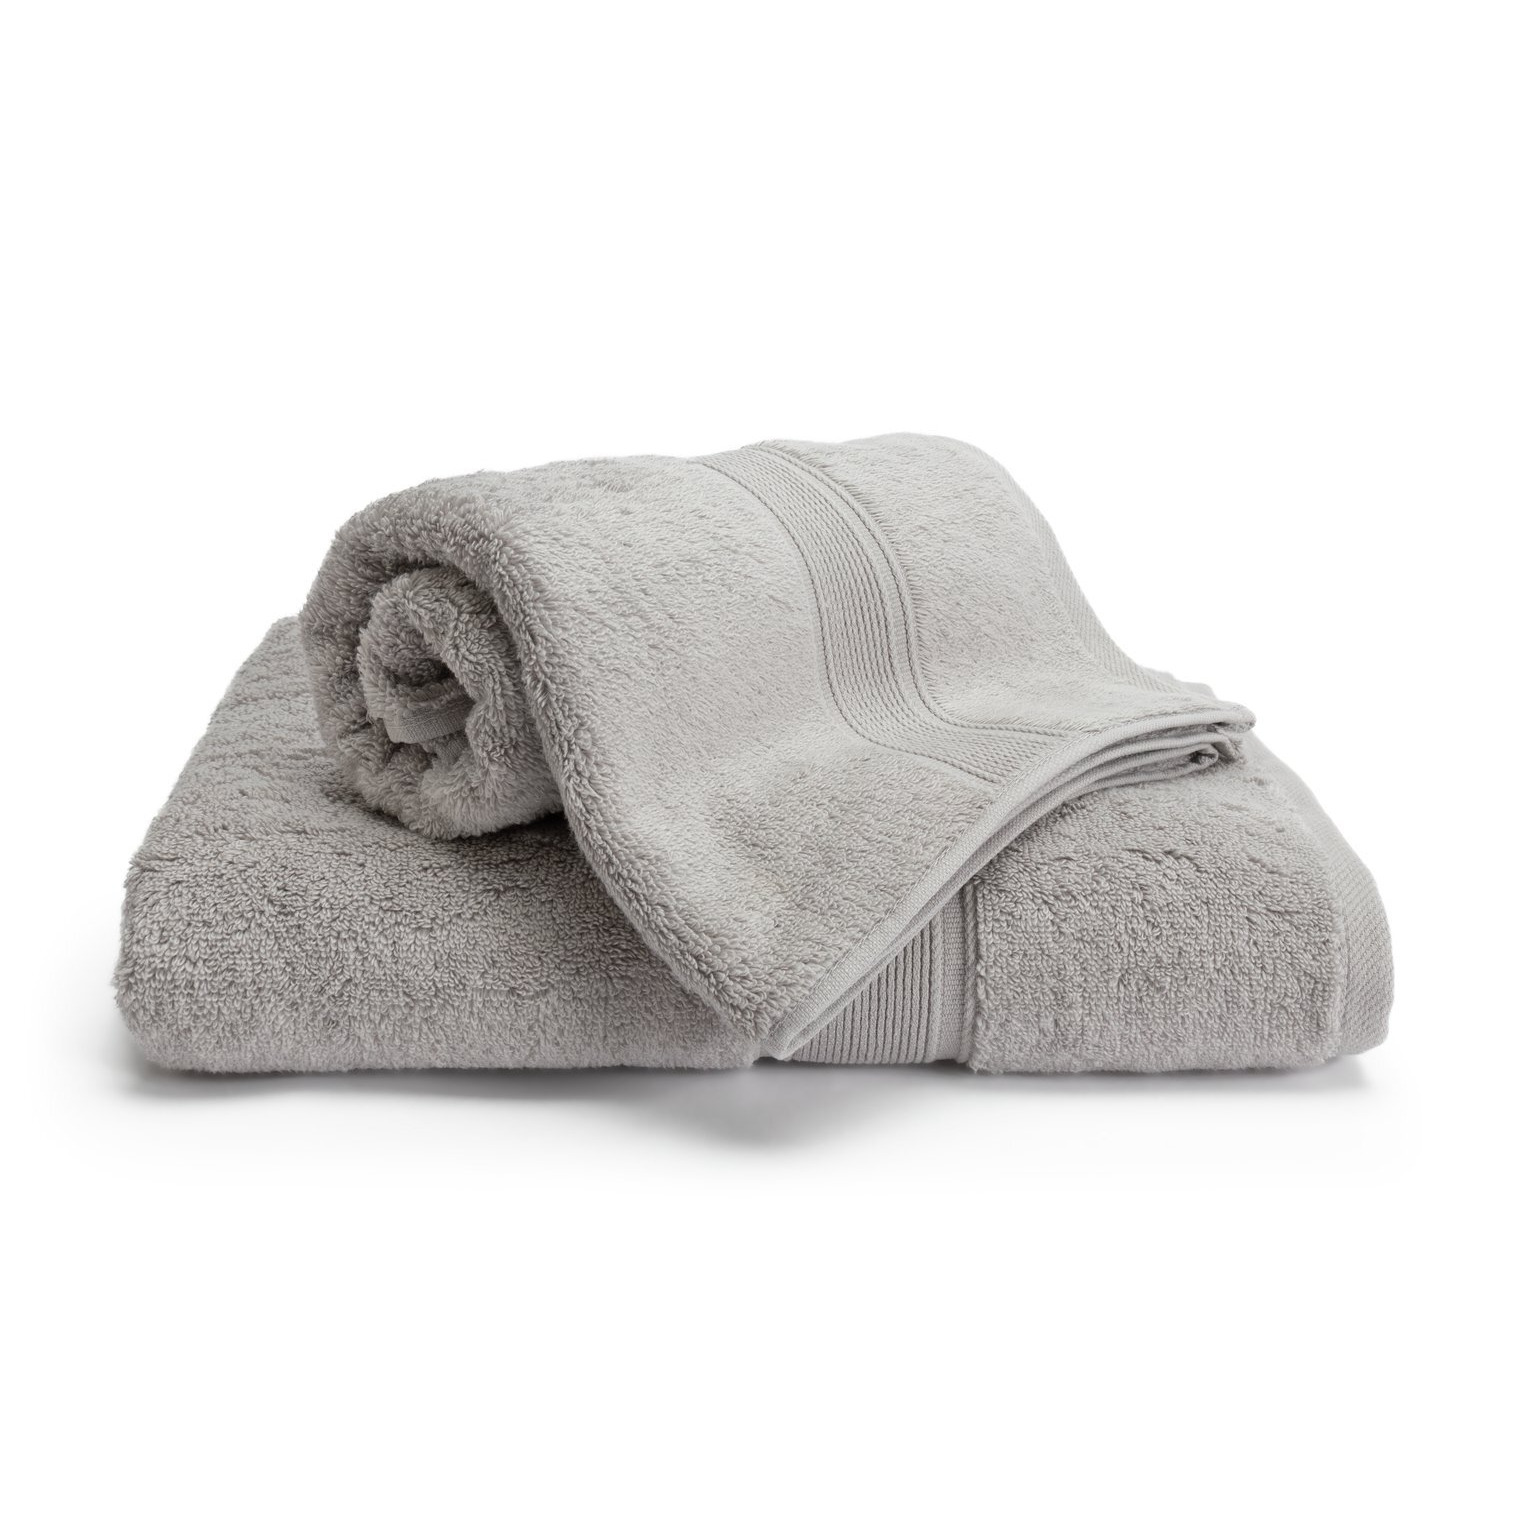 Habitat Cotton Supersoft 2 Pack Face Cloth - Silver - image 1